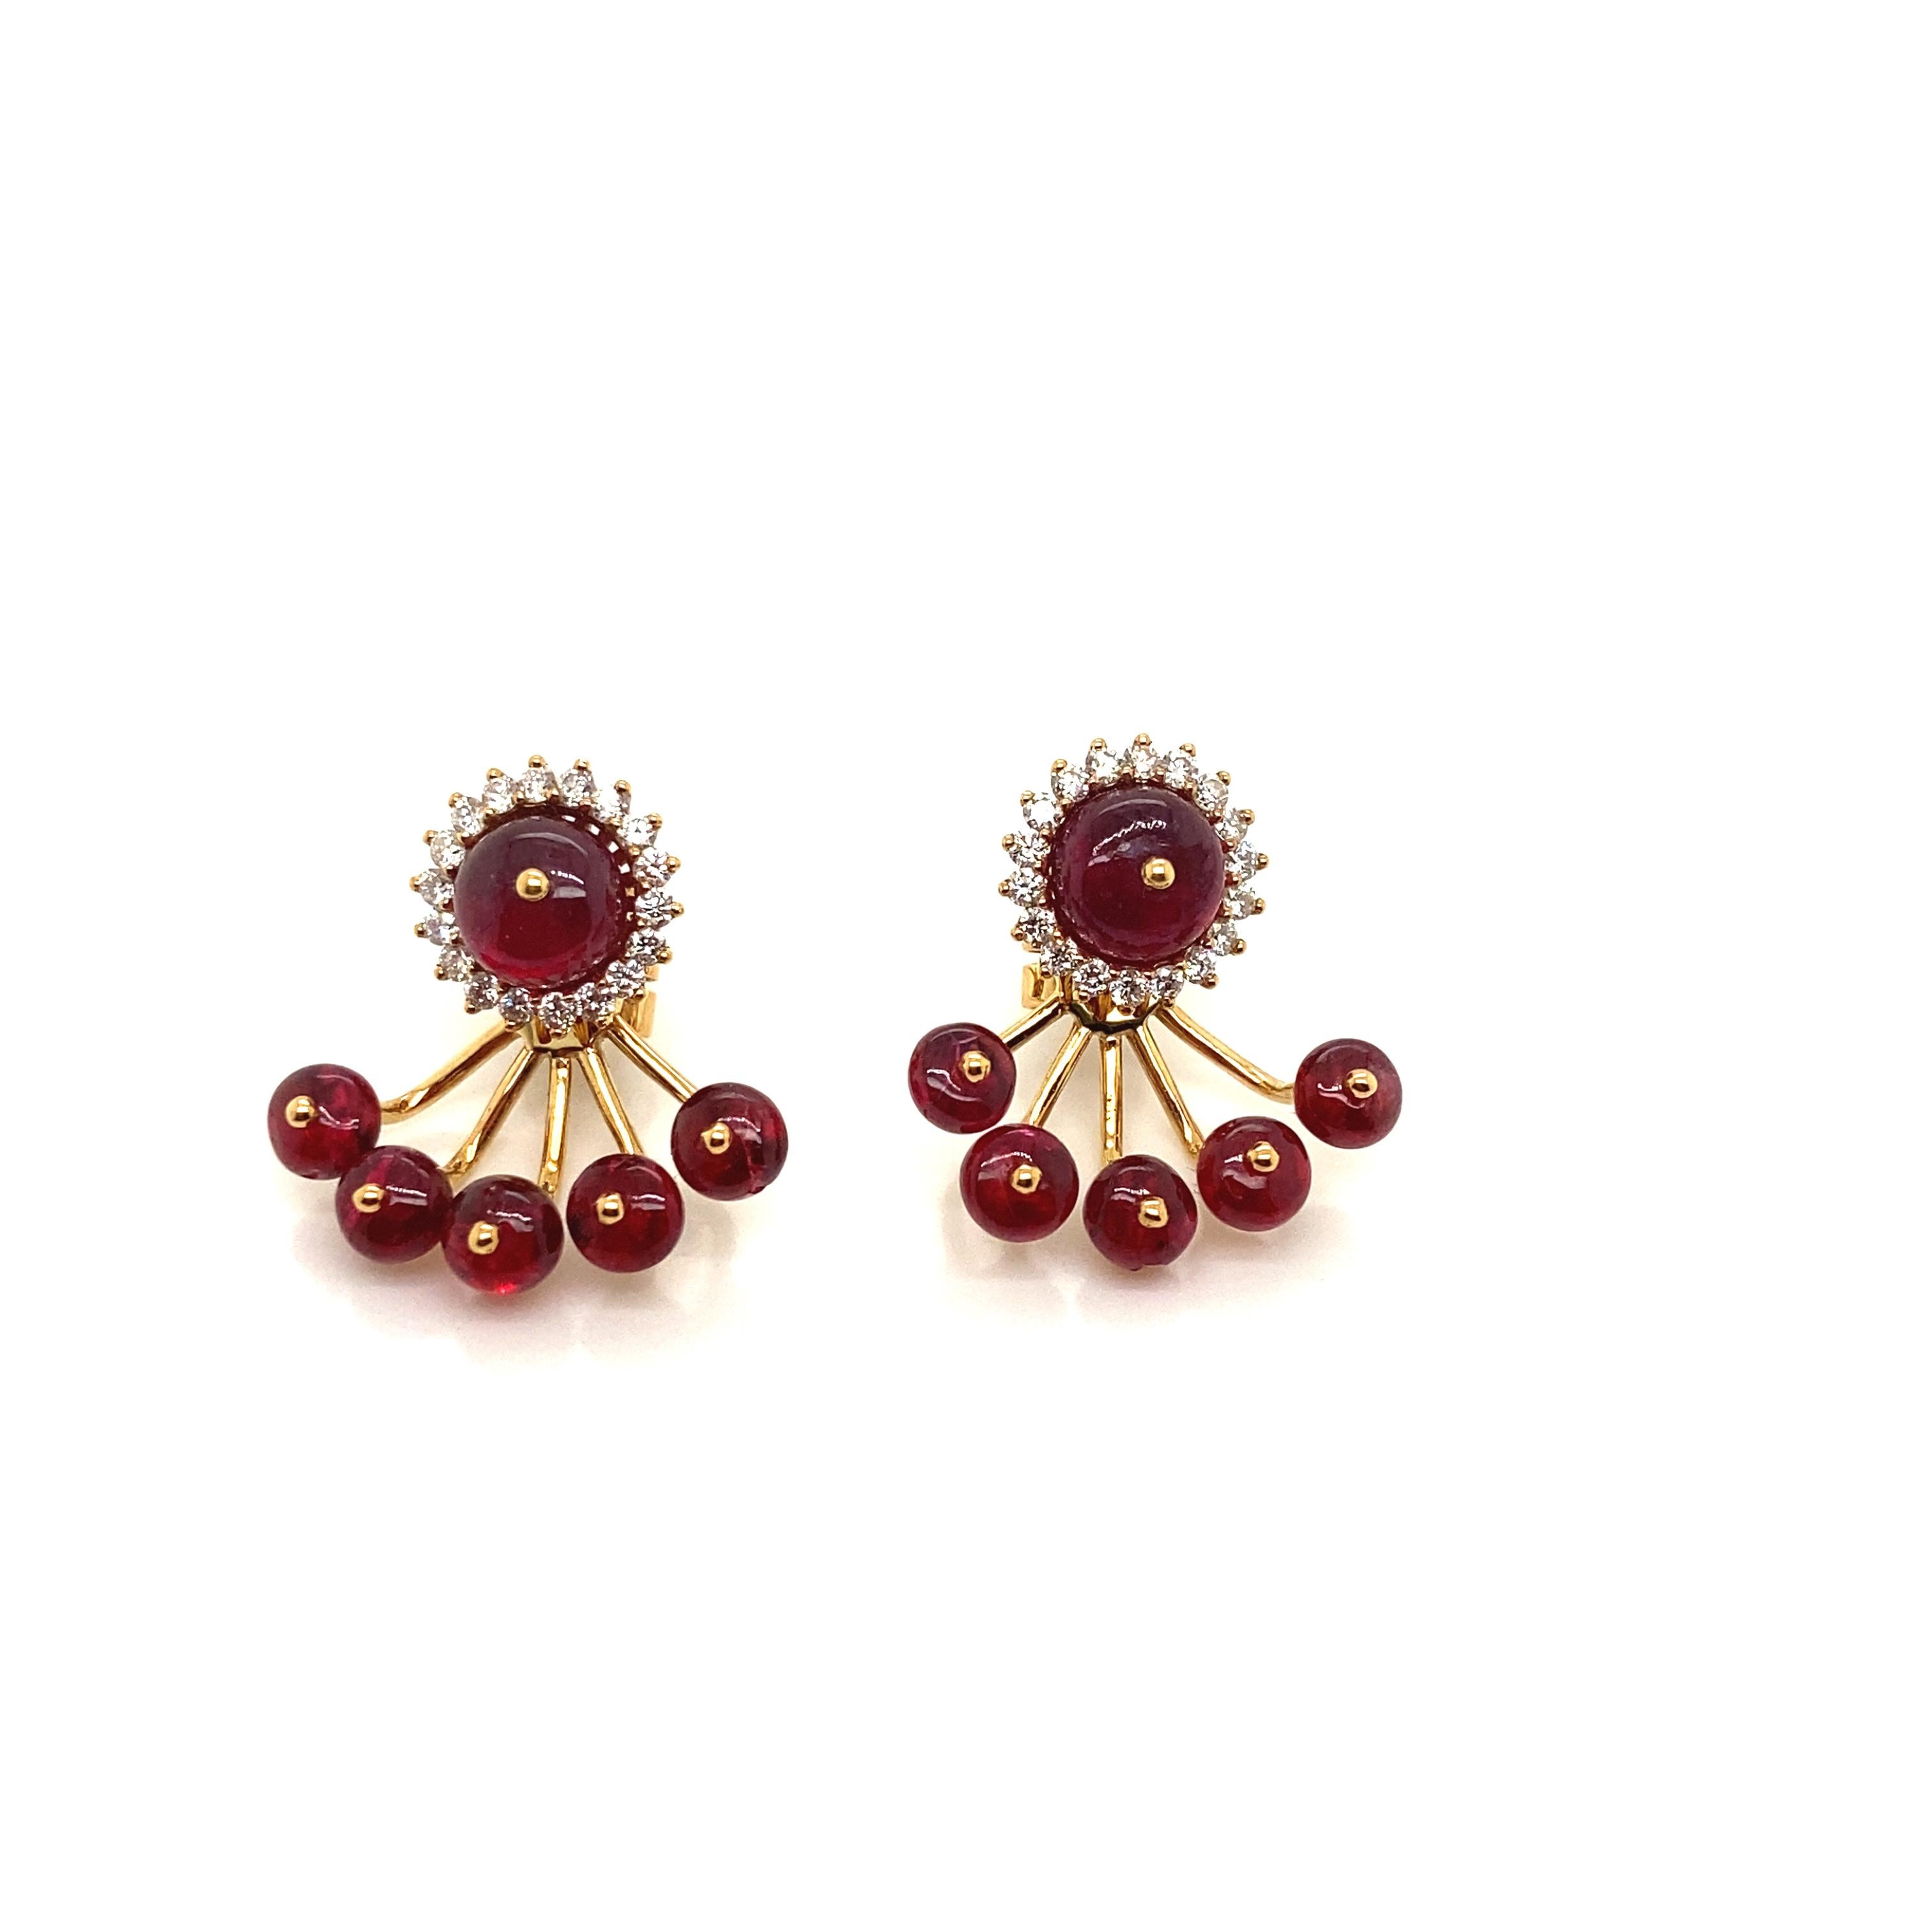 12.98 Carat Natural Red Spinel Beads and Diamond Gold Earrings In New Condition For Sale In Hong Kong, HK